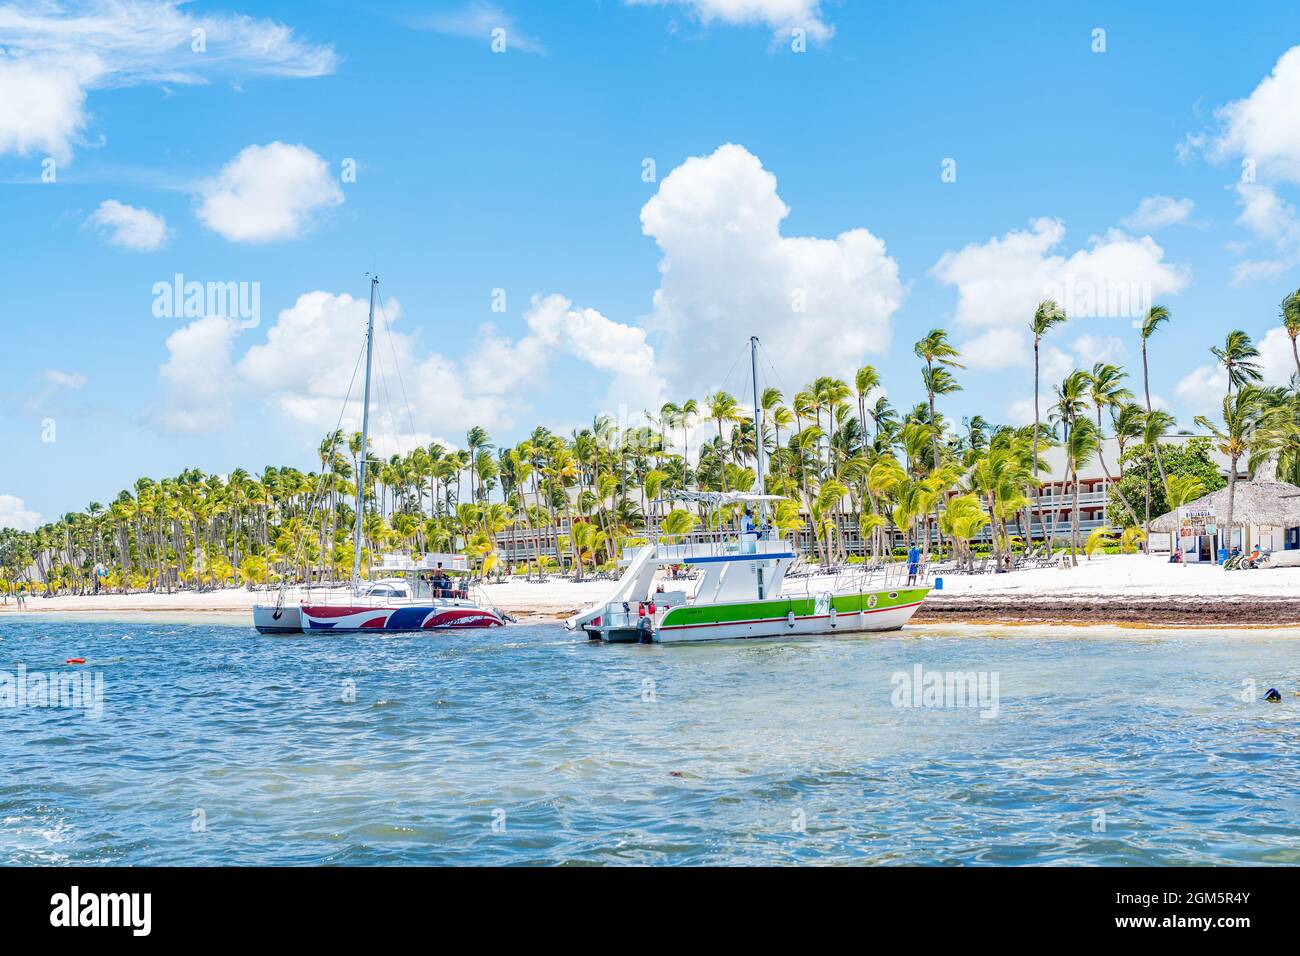 Recreational Boats Docked in Punta Cana Dominican Republic. Stock Photo